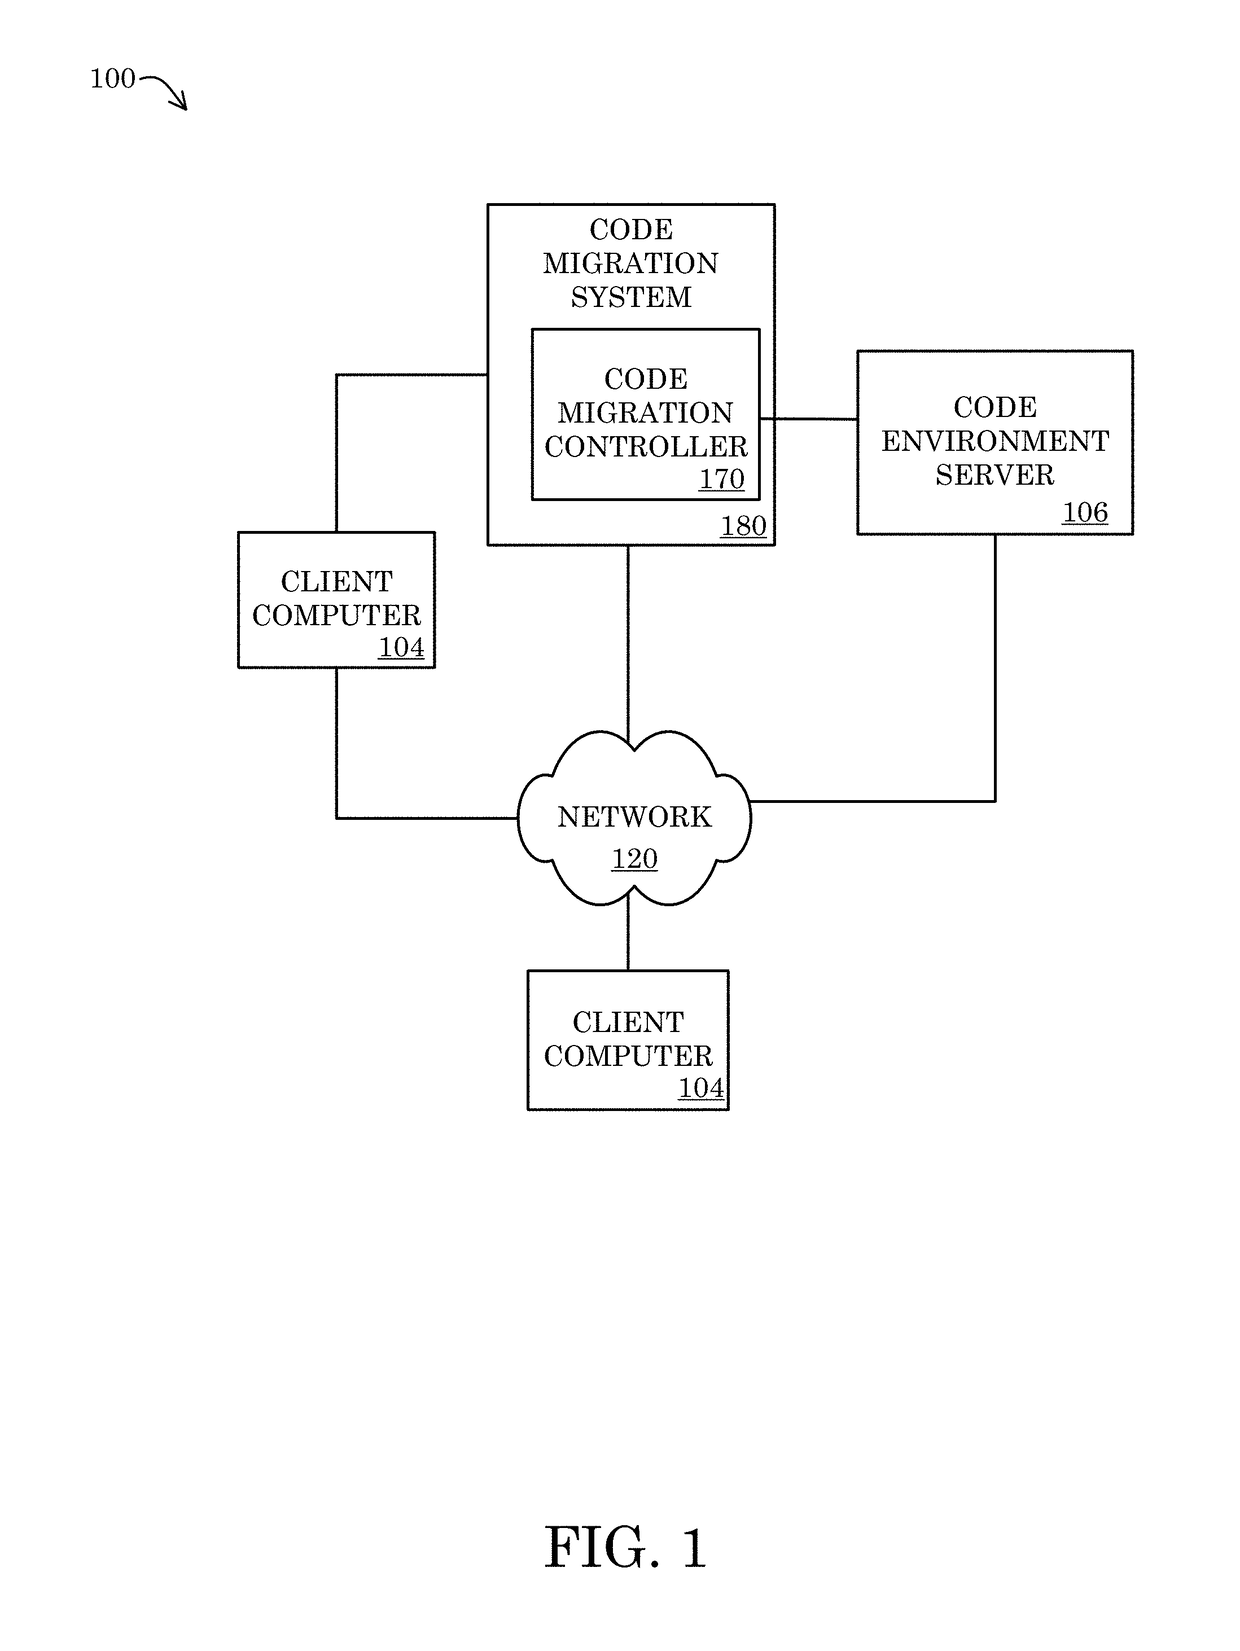 Systems, methods, and apparatus for migrating code to a target environment